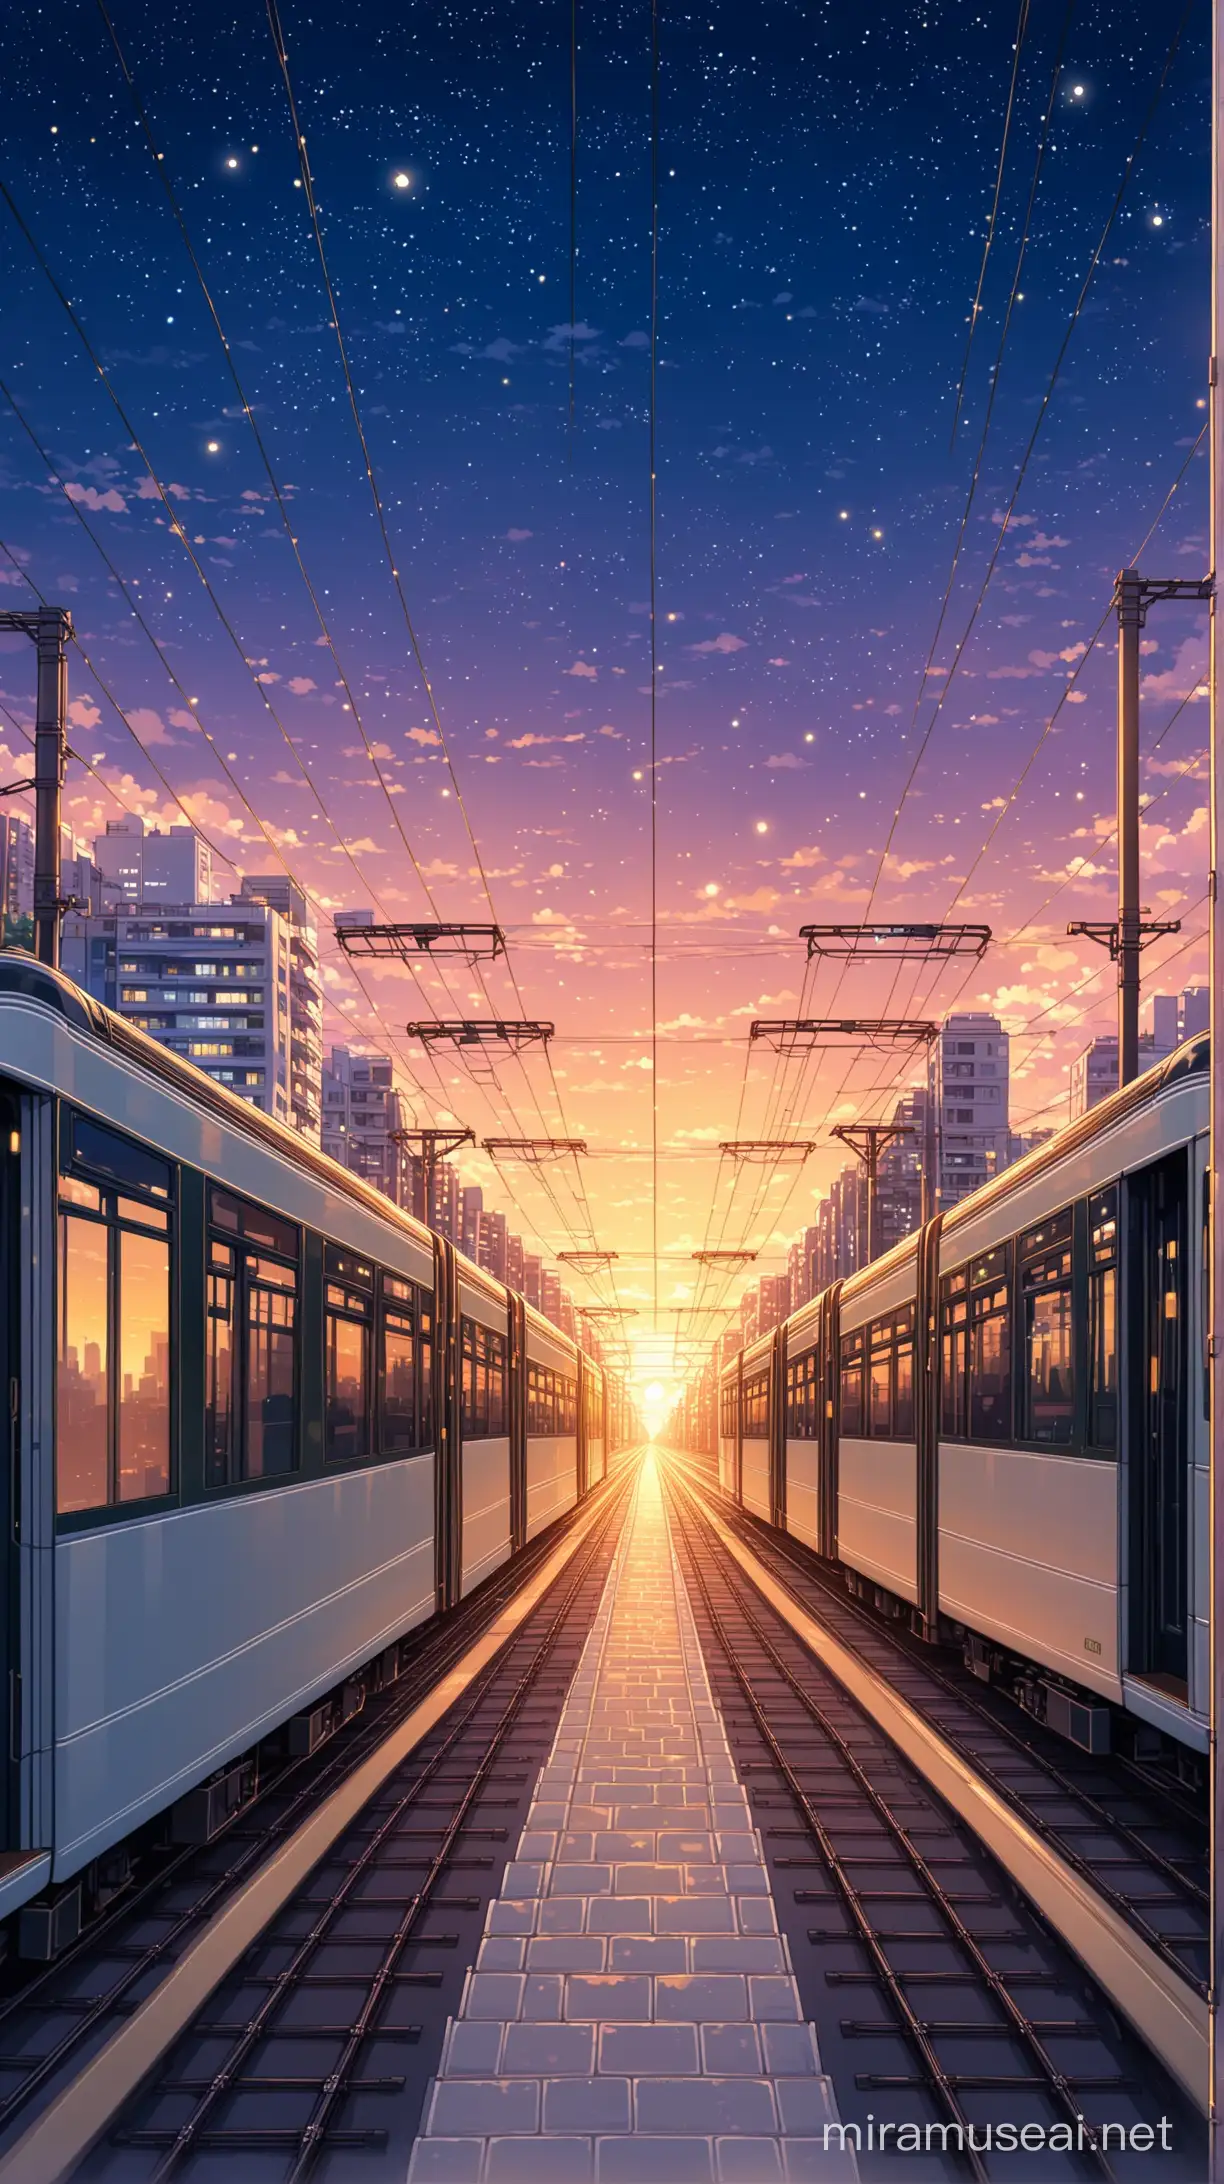 tram rail behind city evening sky with stars cozy life